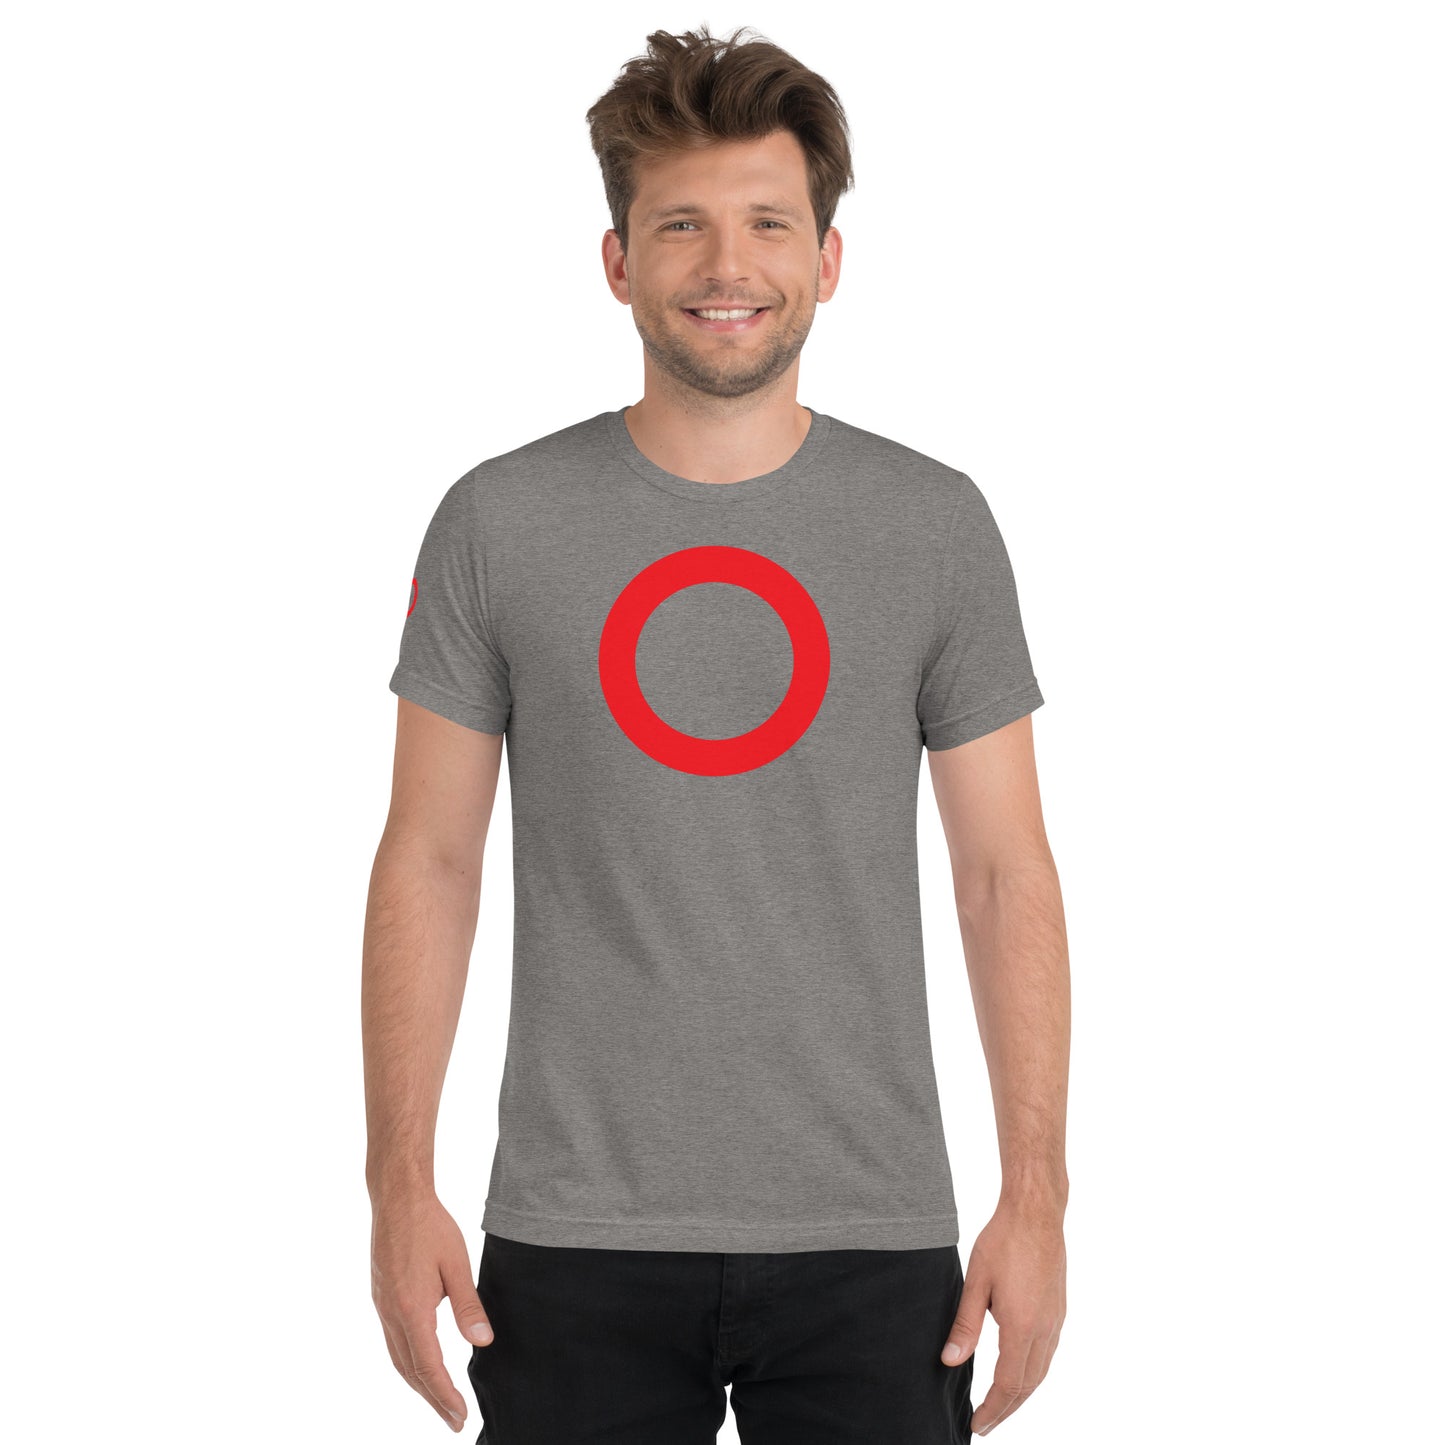 Now, that's a Big Donut - t-shirt